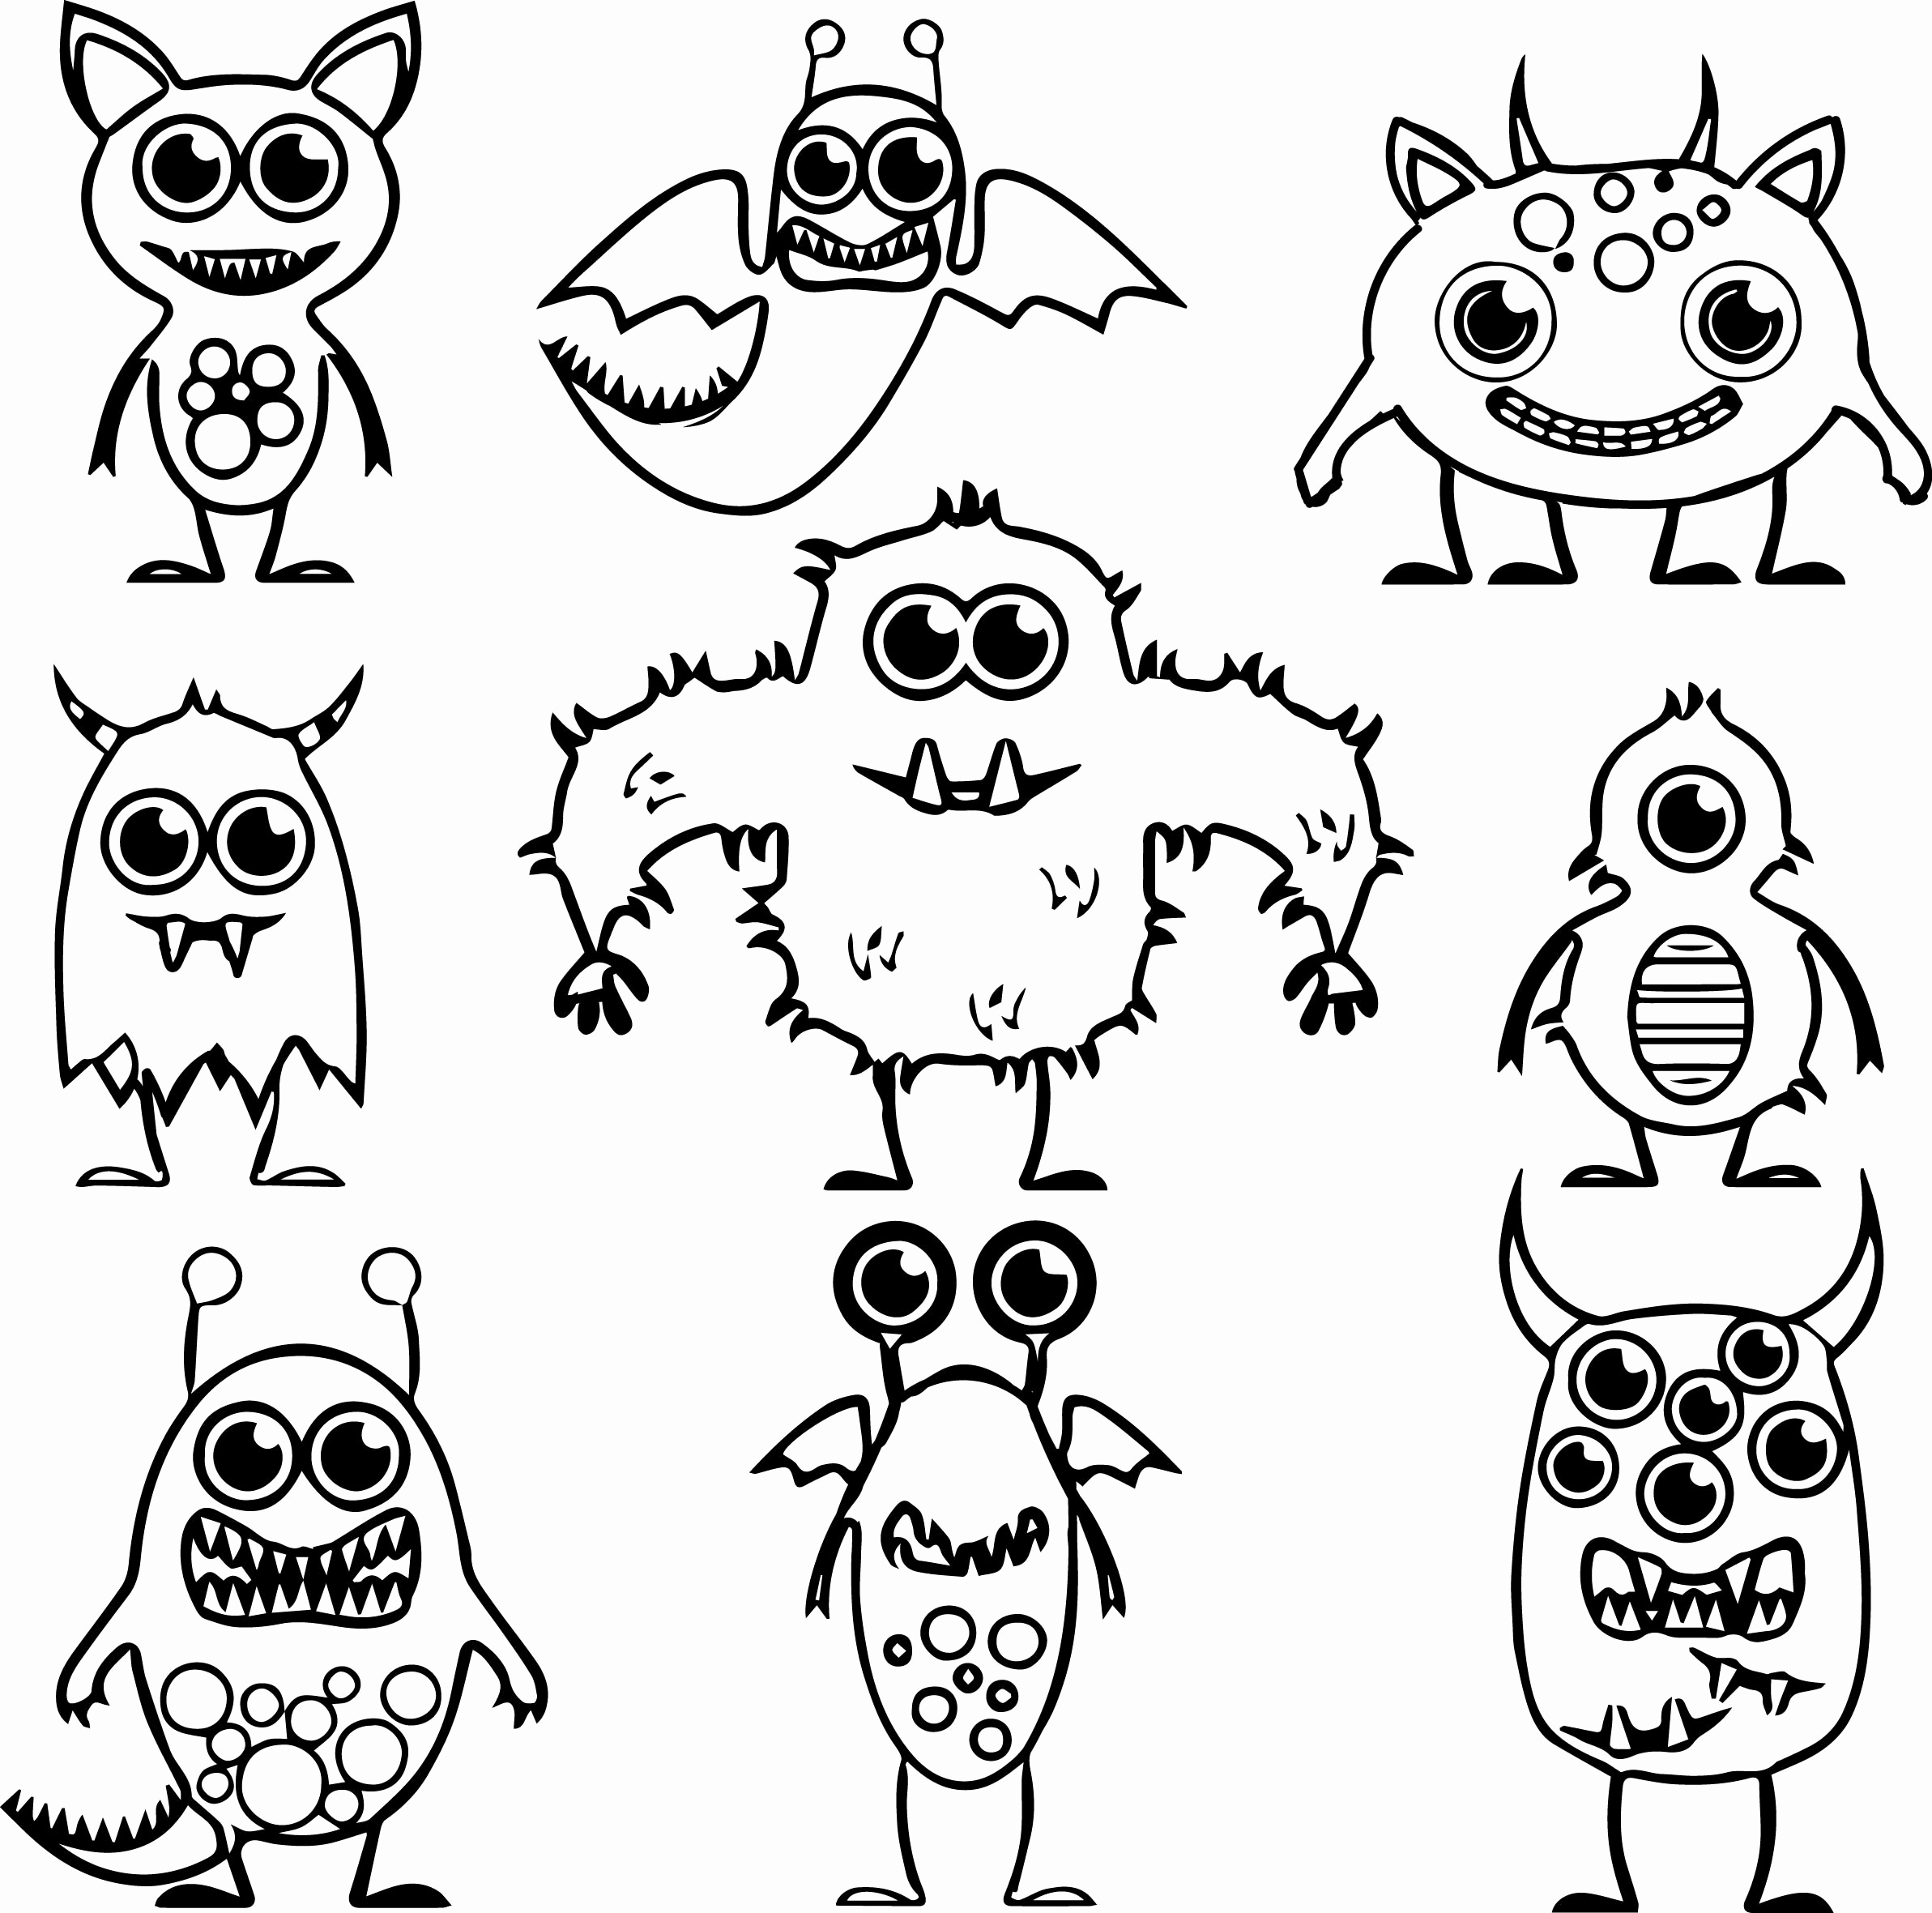 Alien Coloring Pages To Print at GetDrawings Free download